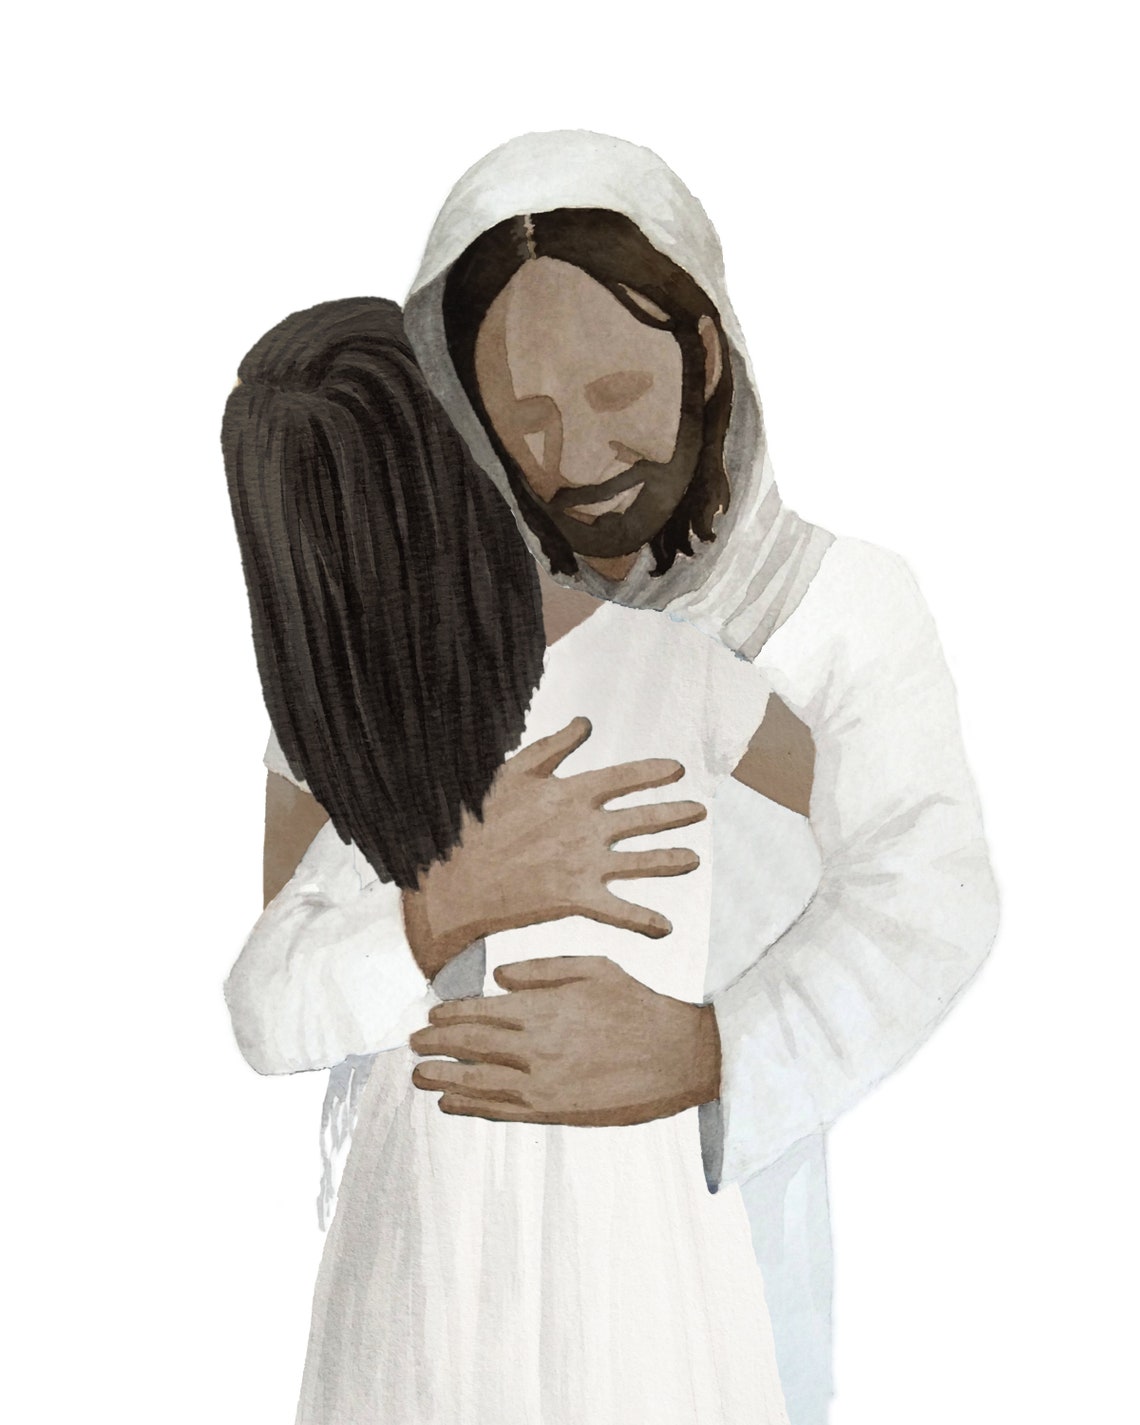 Jesus Christ Hugging Girl With Straight Black Hair and Tan - Etsy